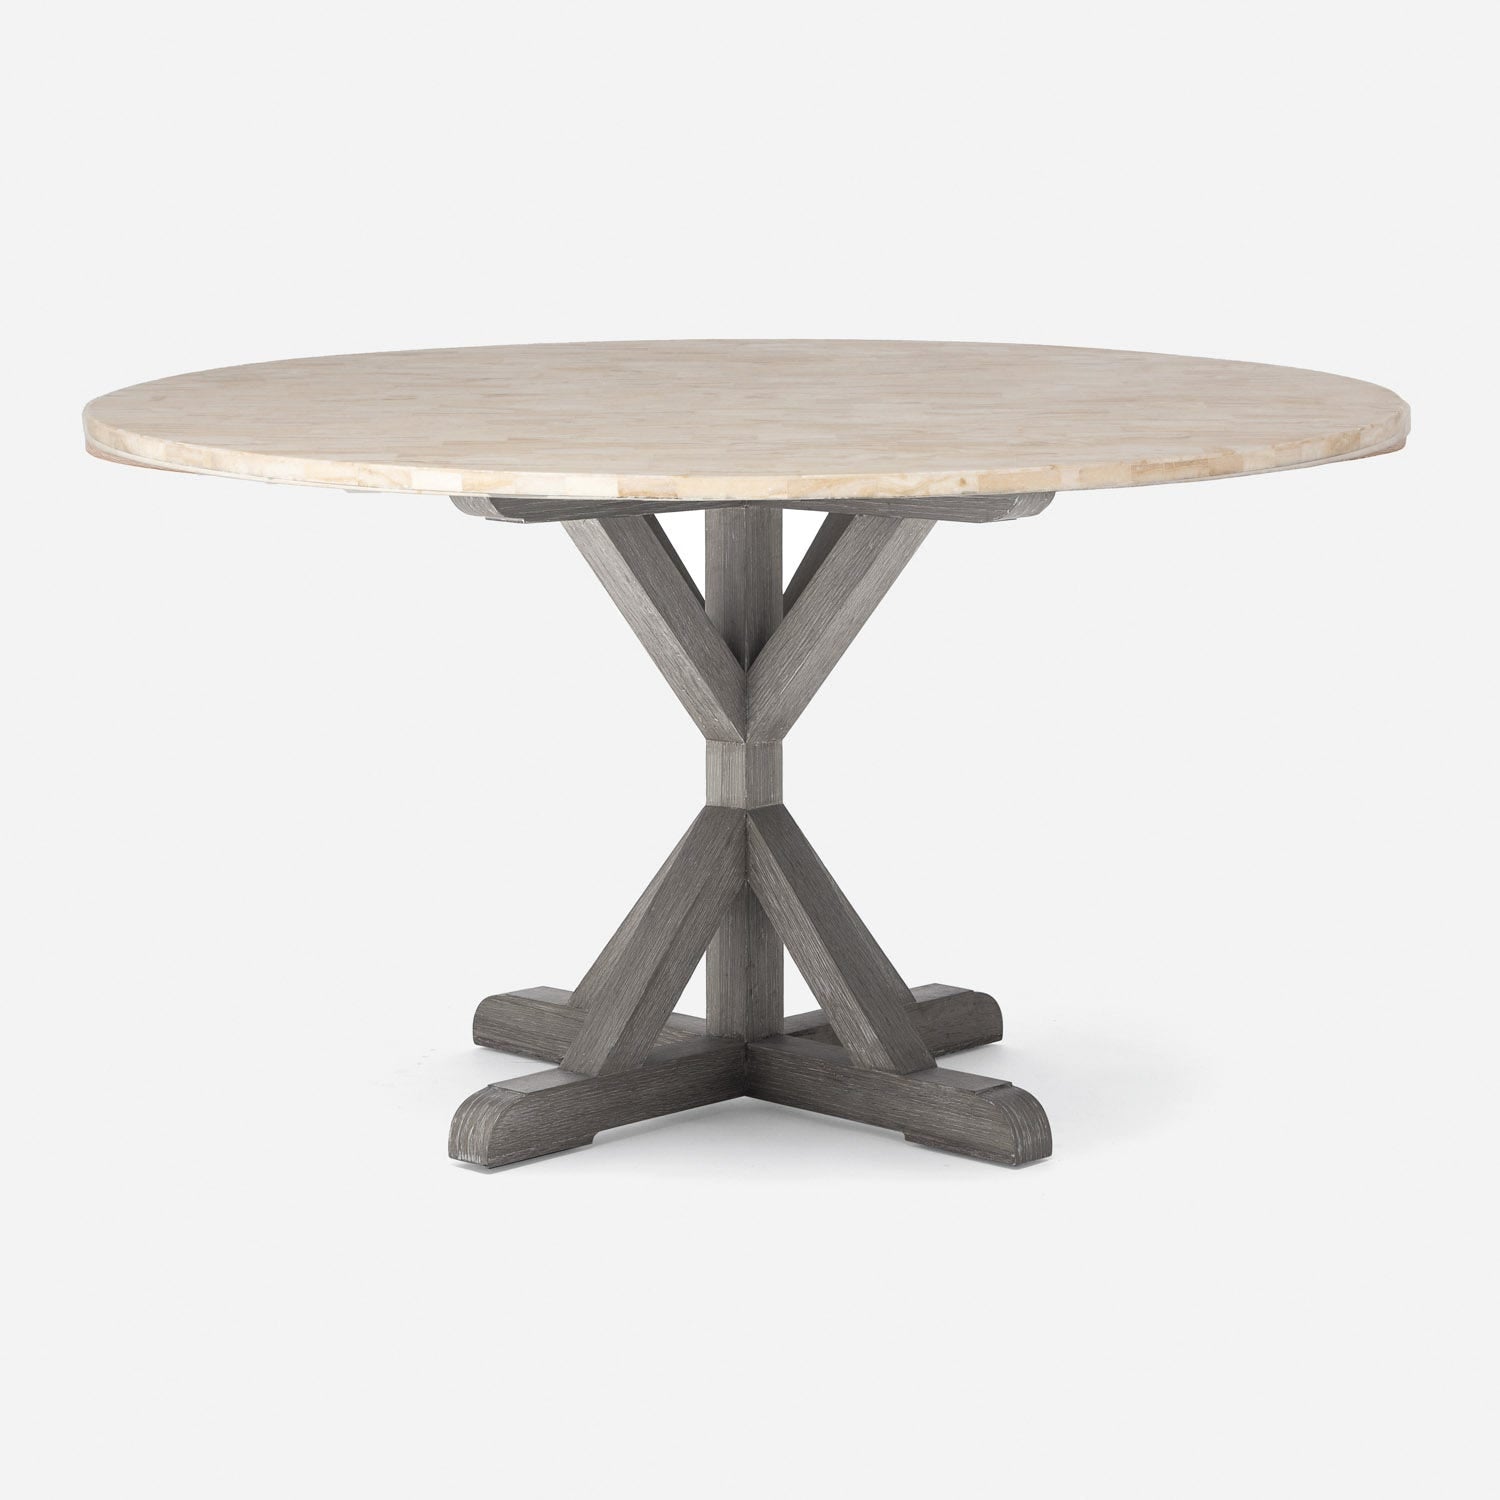 Made Goods Dane 48" x 30" Gray Cerused Oak Dinning Table With Round Beige Crystal Stone Table Top